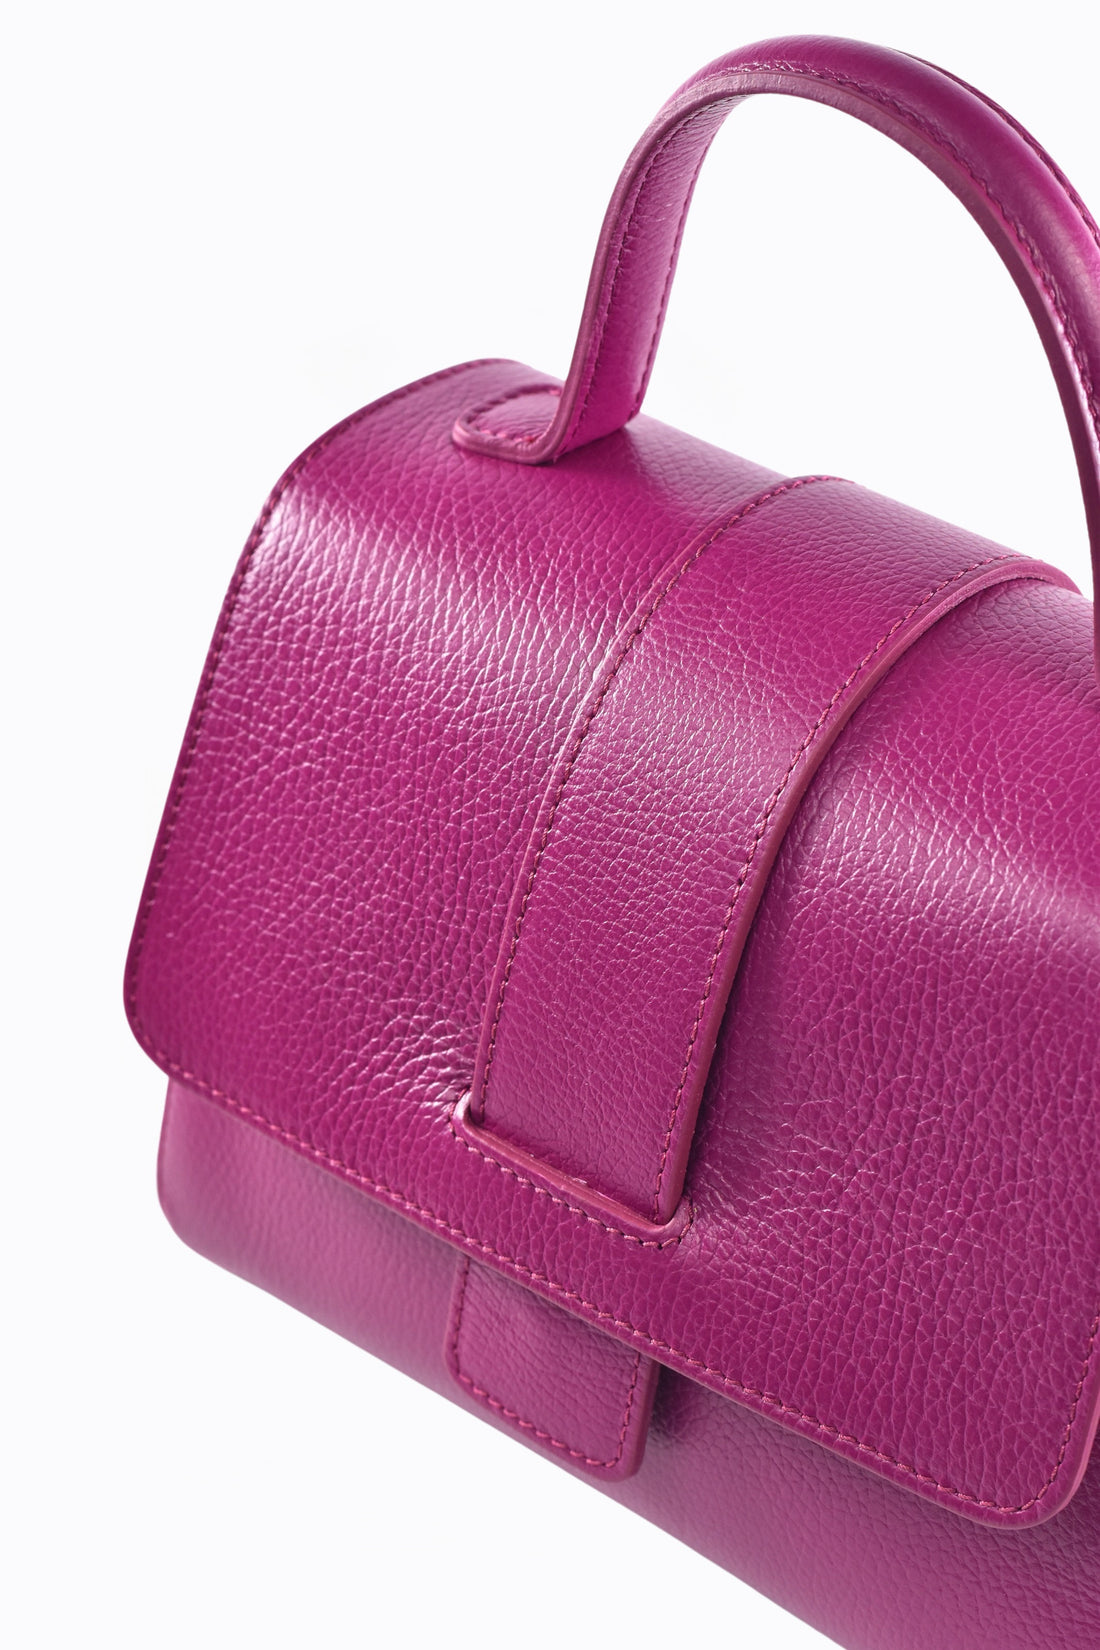 Nives bag in Bubble Pink Dollar leather